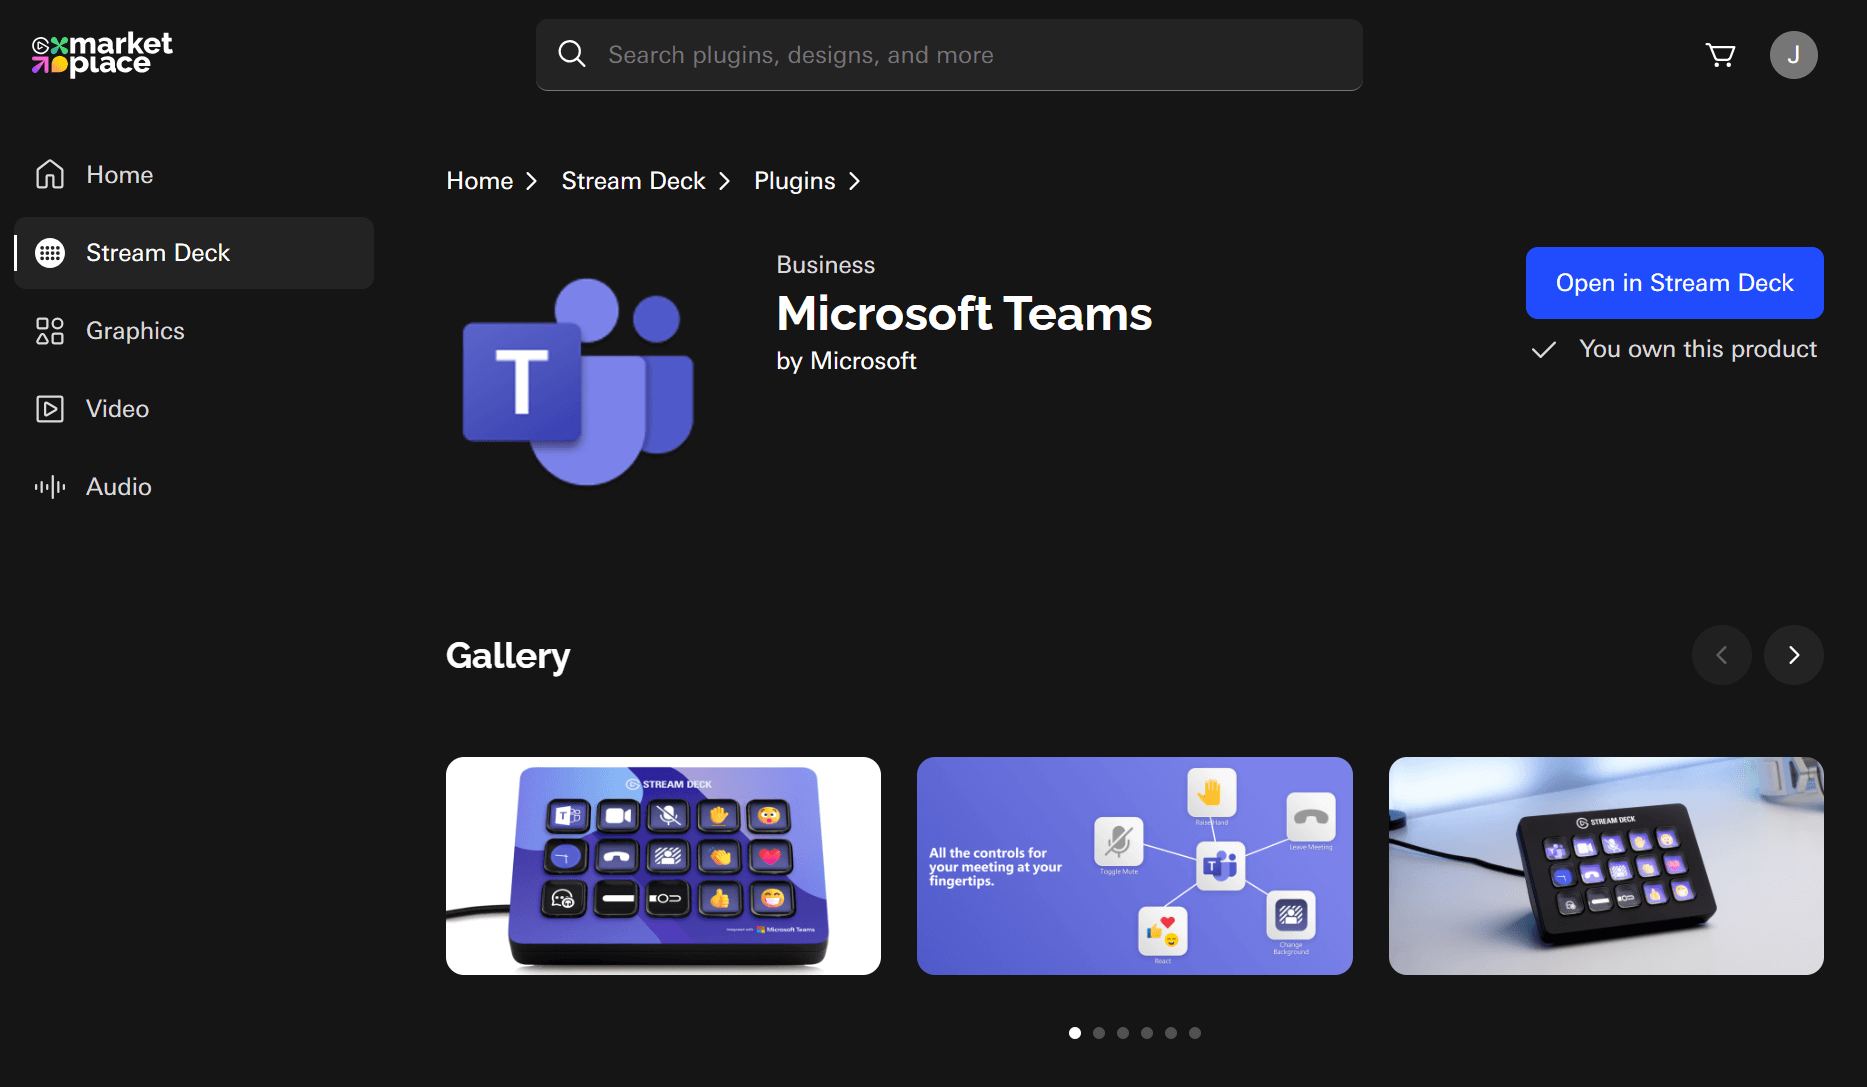 Use Elgato StreamDeck with the new Microsoft Teams